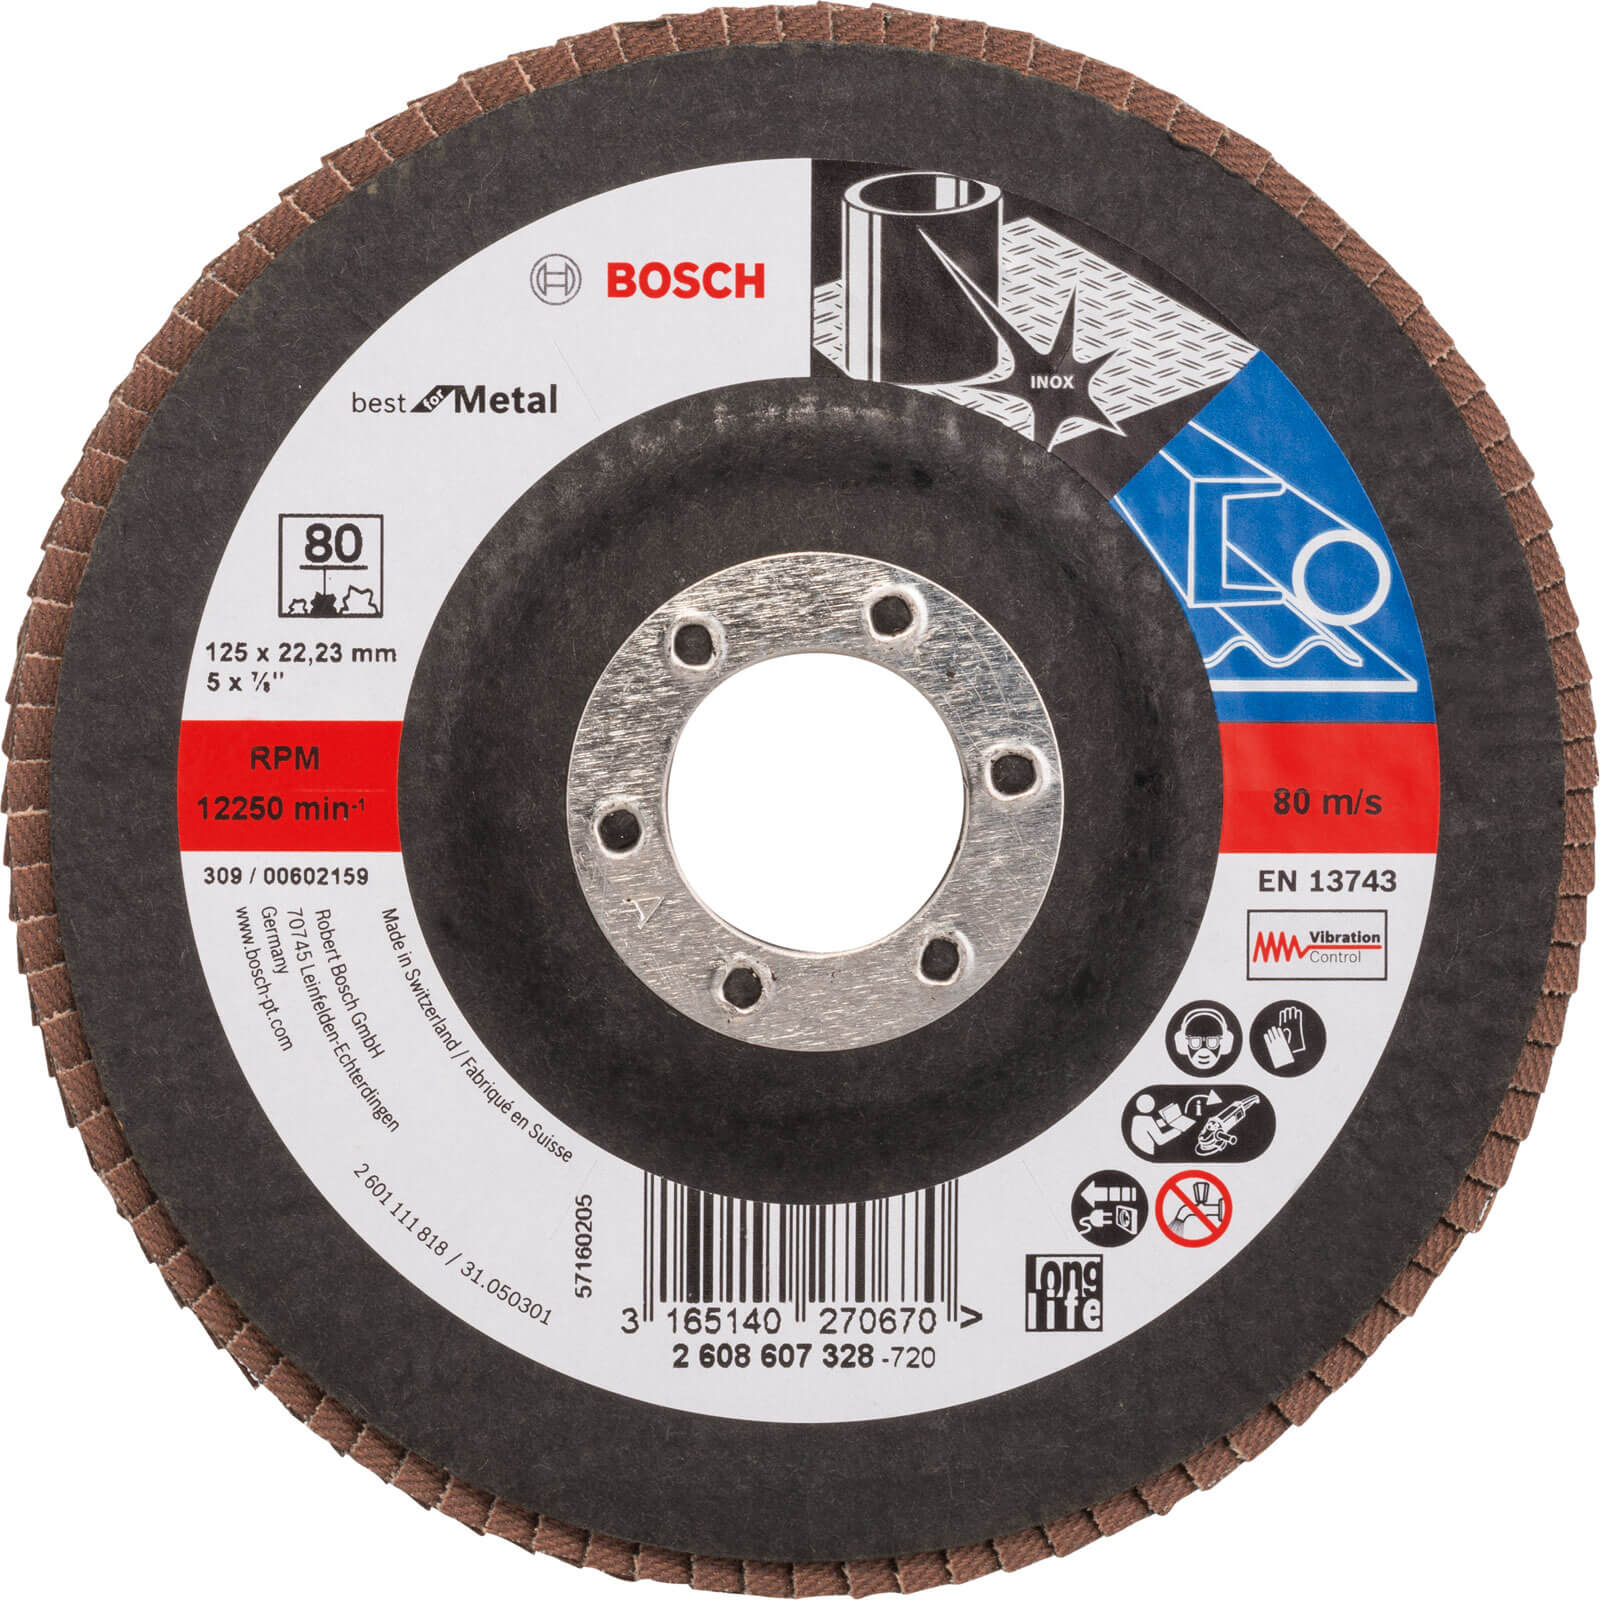 Bosch X571 Best for Metal Straight Flap Disc 125mm 80g Pack of 1